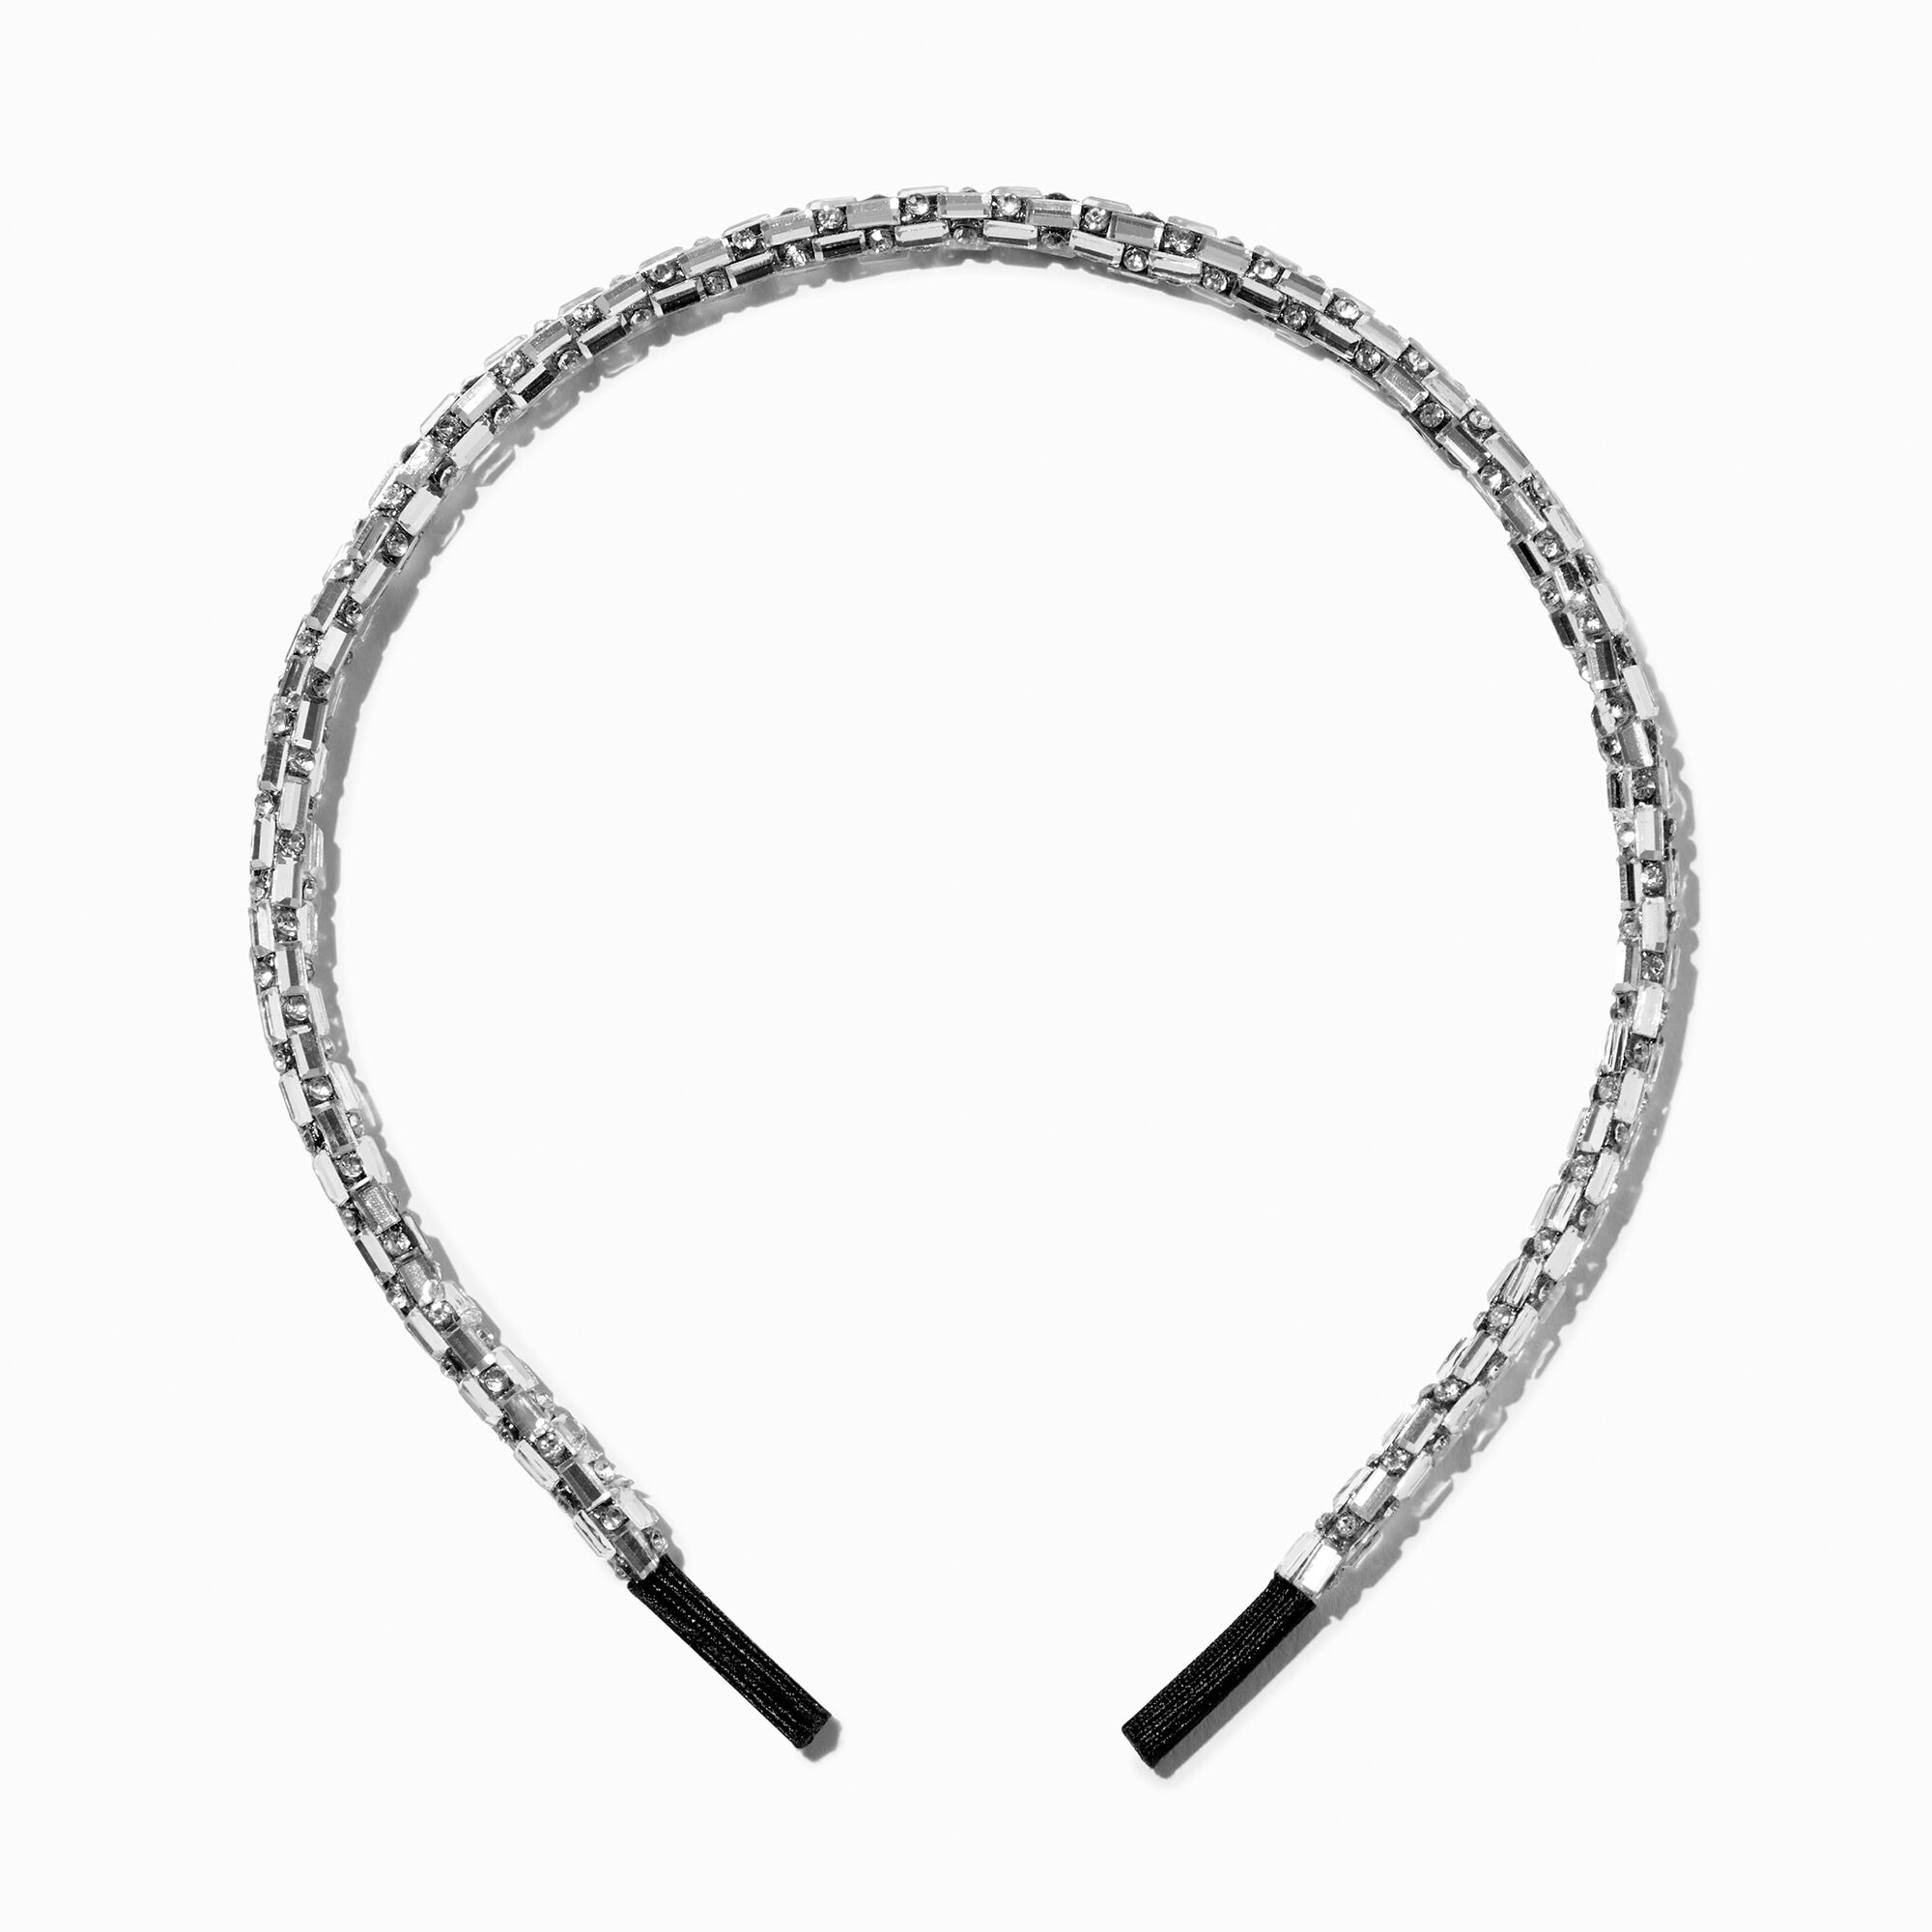 View Claires Tone Pave Emmy Headband Silver information